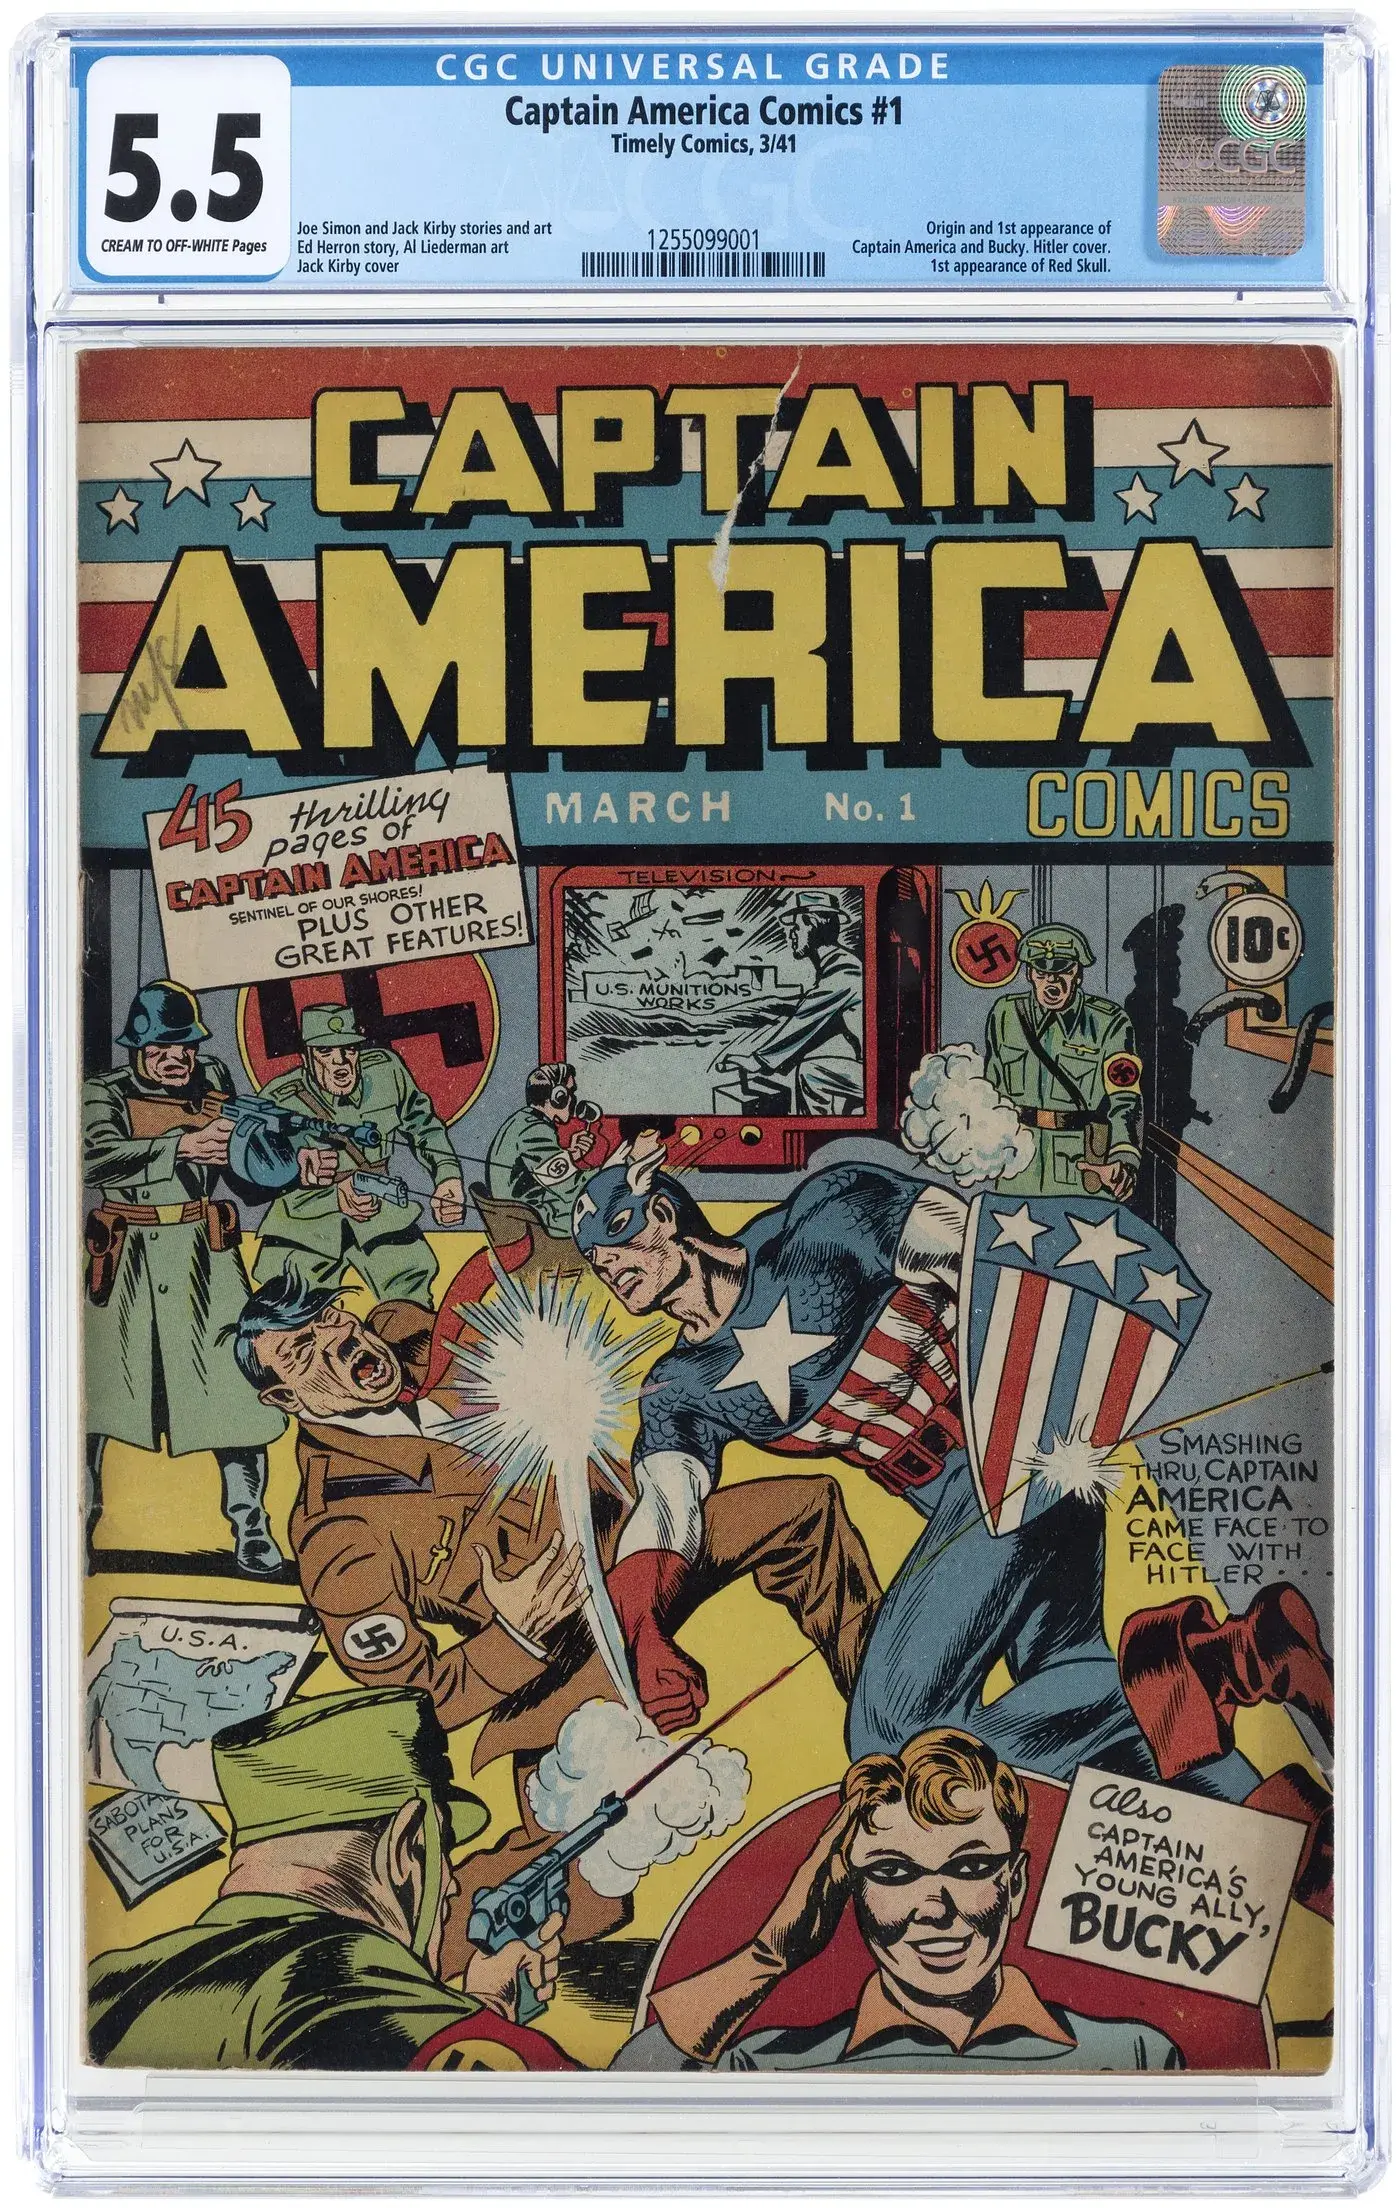 ‘Captain America Comics’ #1, March 1941, CGC 5.5 Fine-, with origin and first appearance of Captain America, Bucky Barnes, and their nemesis The Red Skull. Action-packed World War II cover shows the Captain punching Hitler. Stories by Joe Simon and Jack Kirby. Cover art by Kirby; interior art by Simon, Kirby and Al Liederman. Key Golden Age comic book with historical significance. Estimate: $200,000+